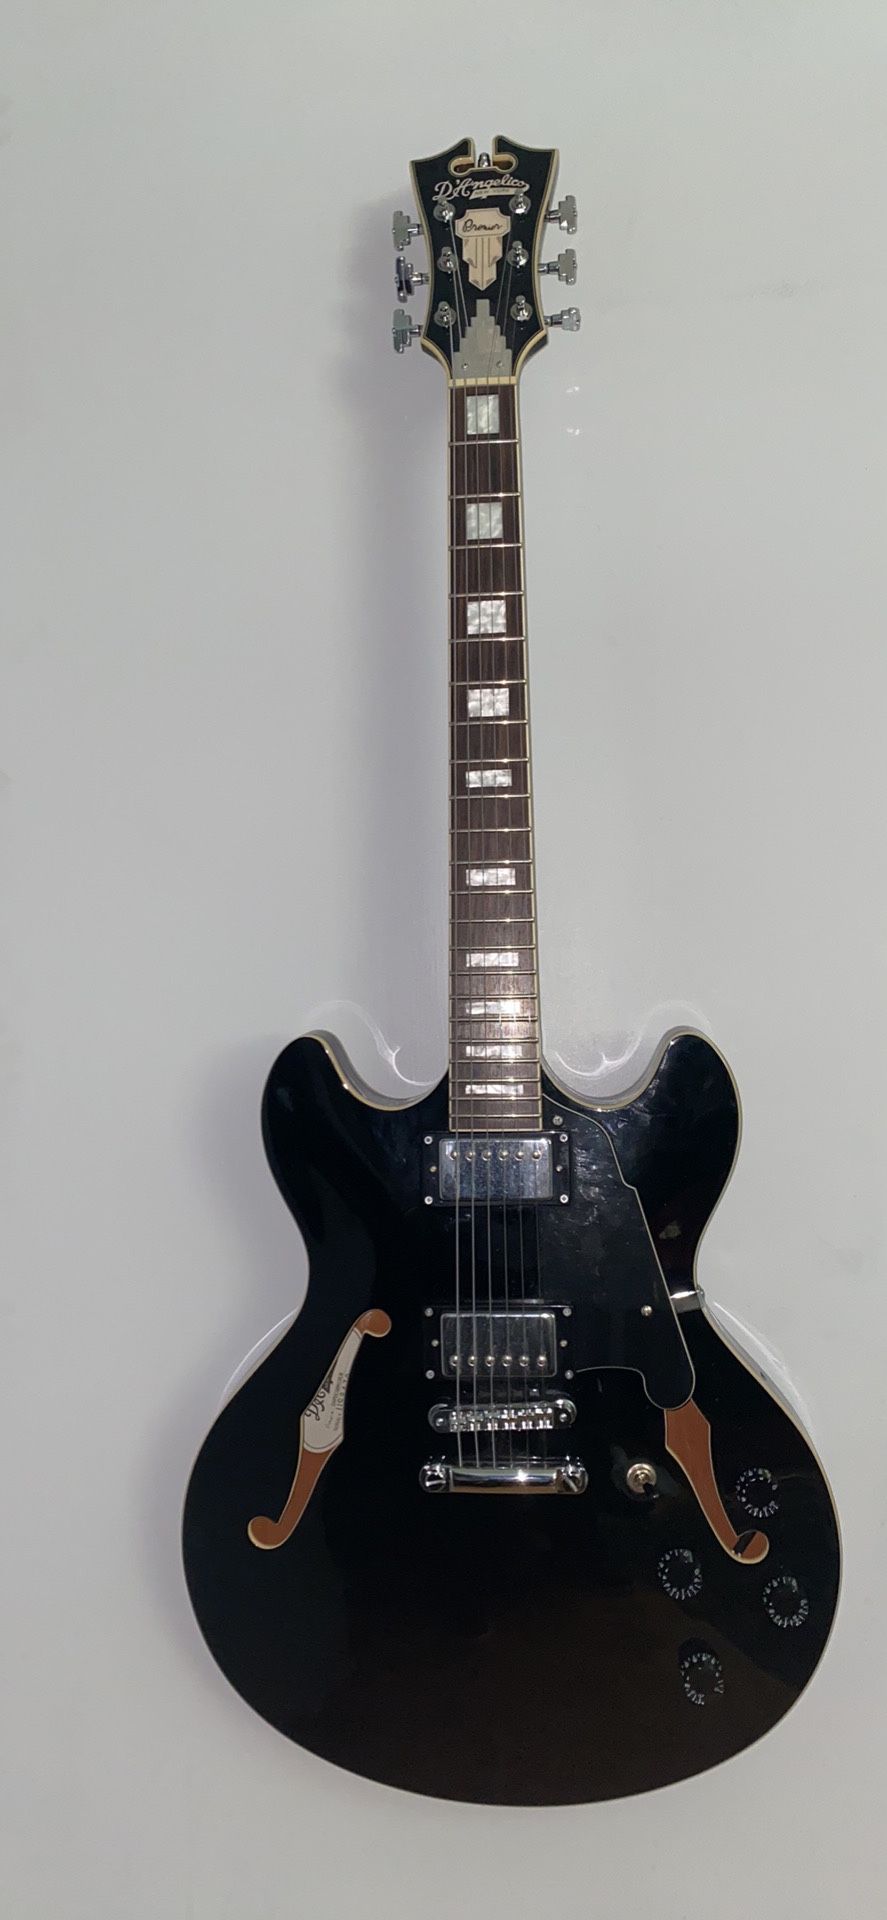 Black D’Angelico Electric Guitar